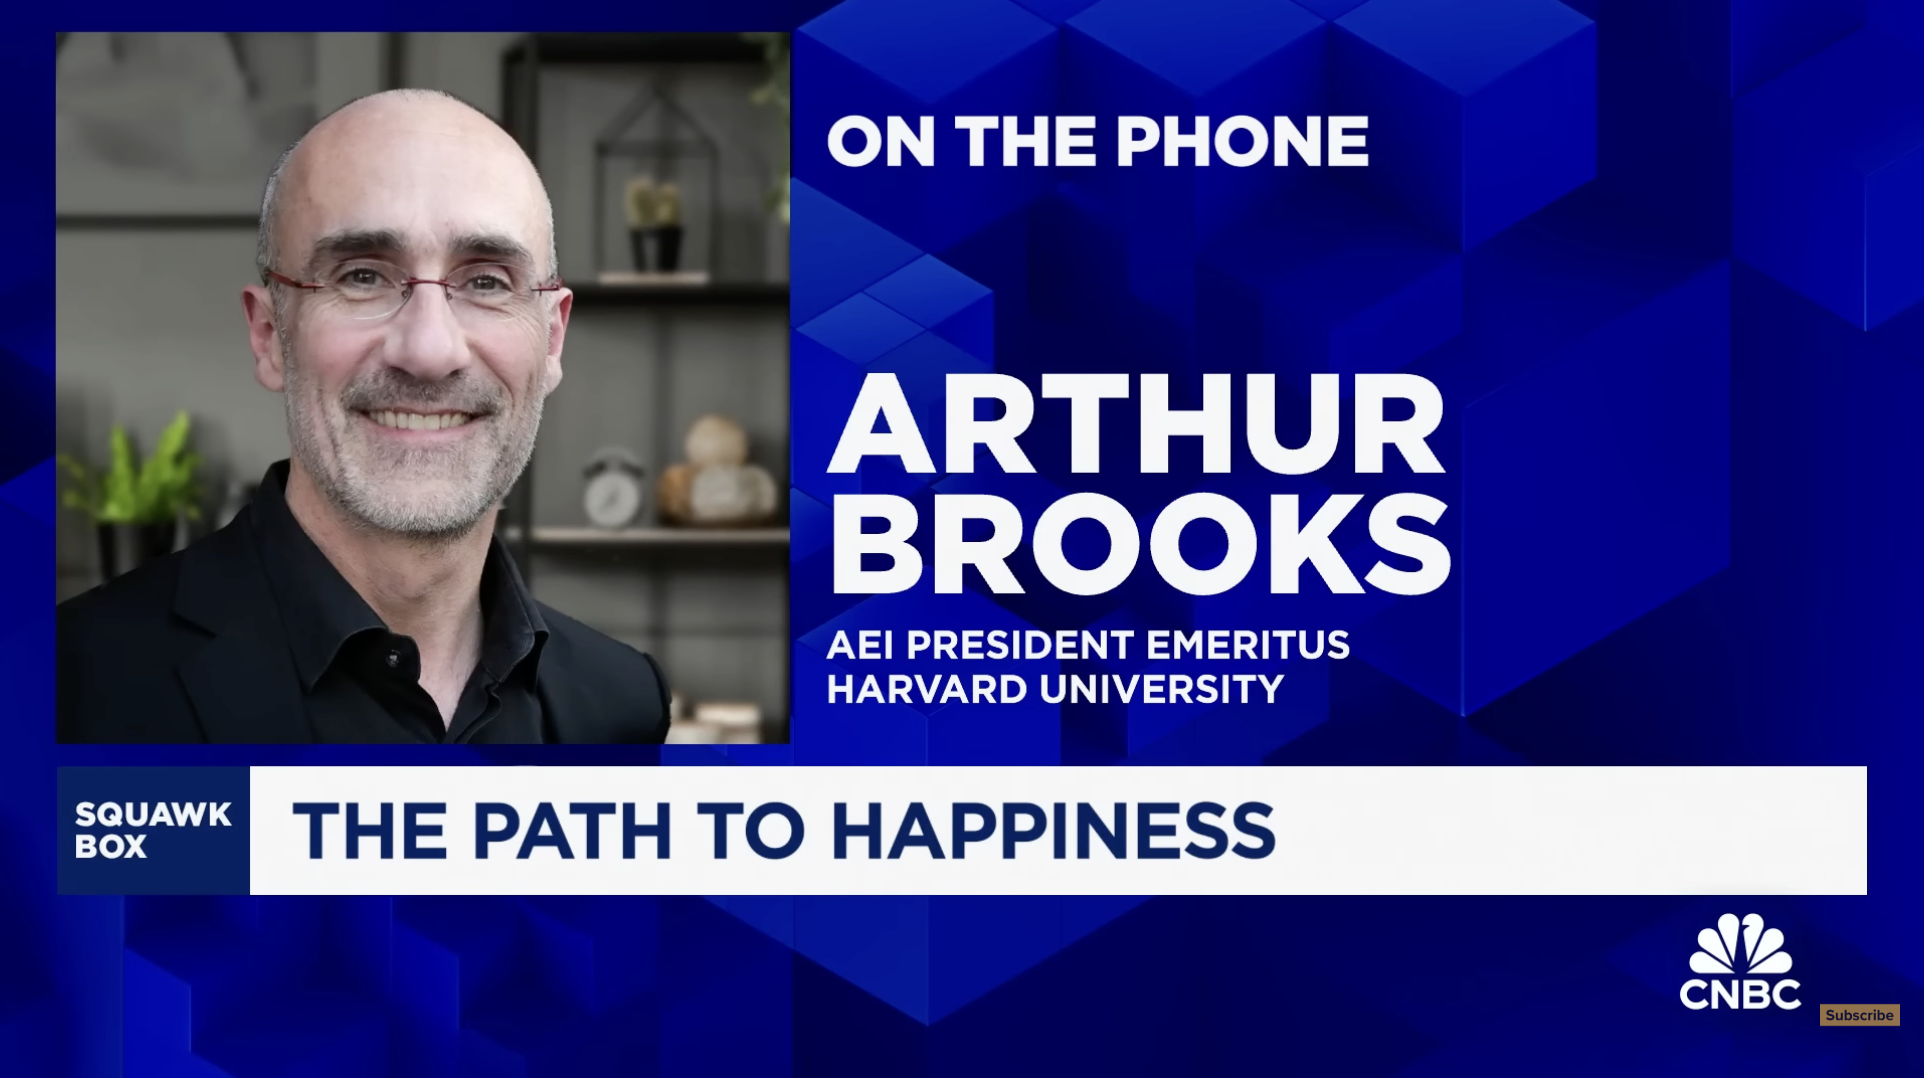 Squawk Box: Happiness has everything to do with 'family, life and adventure', says Harvard's Arthur Brooks